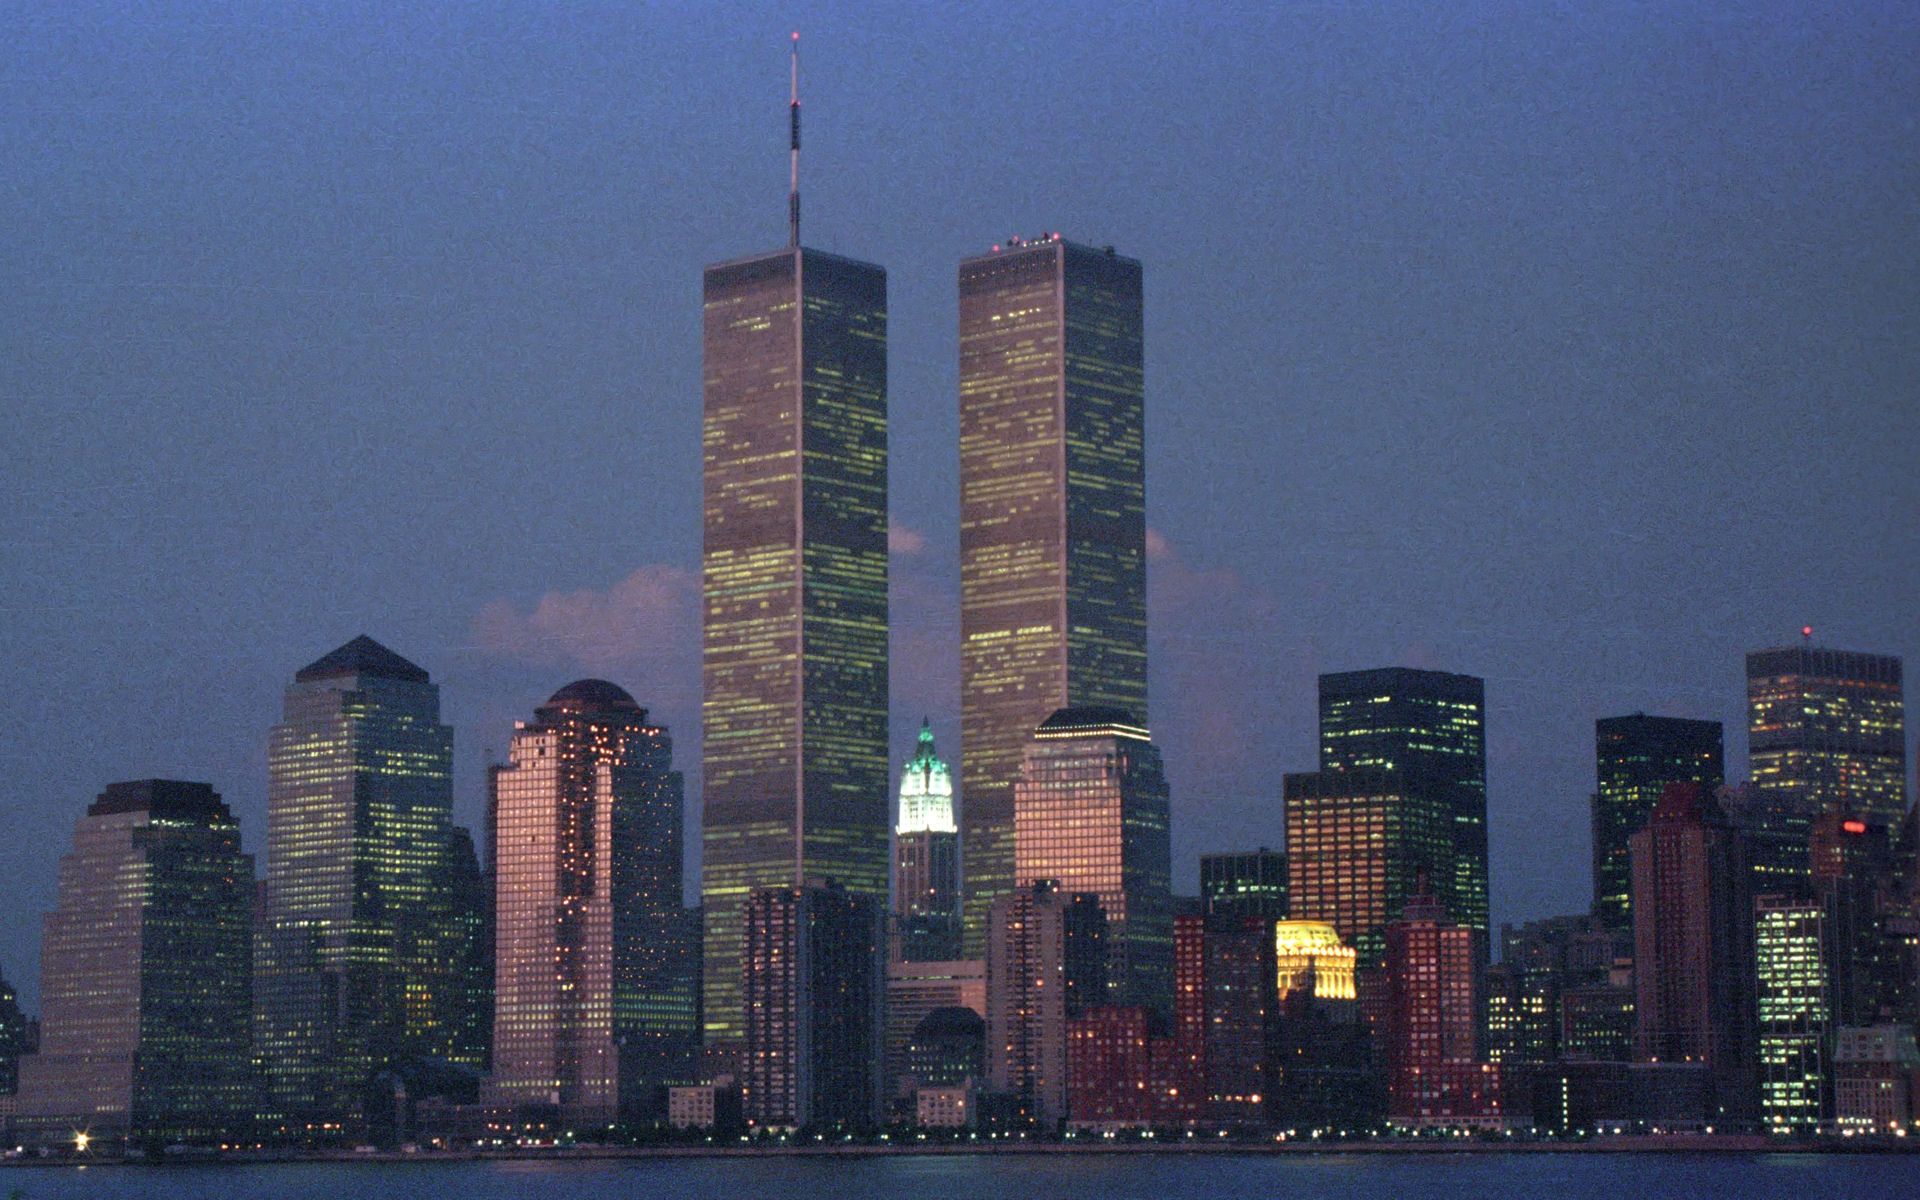 Twin Towers Desktop Wallpaper, Twin Towers Pictures Cool Backgrounds